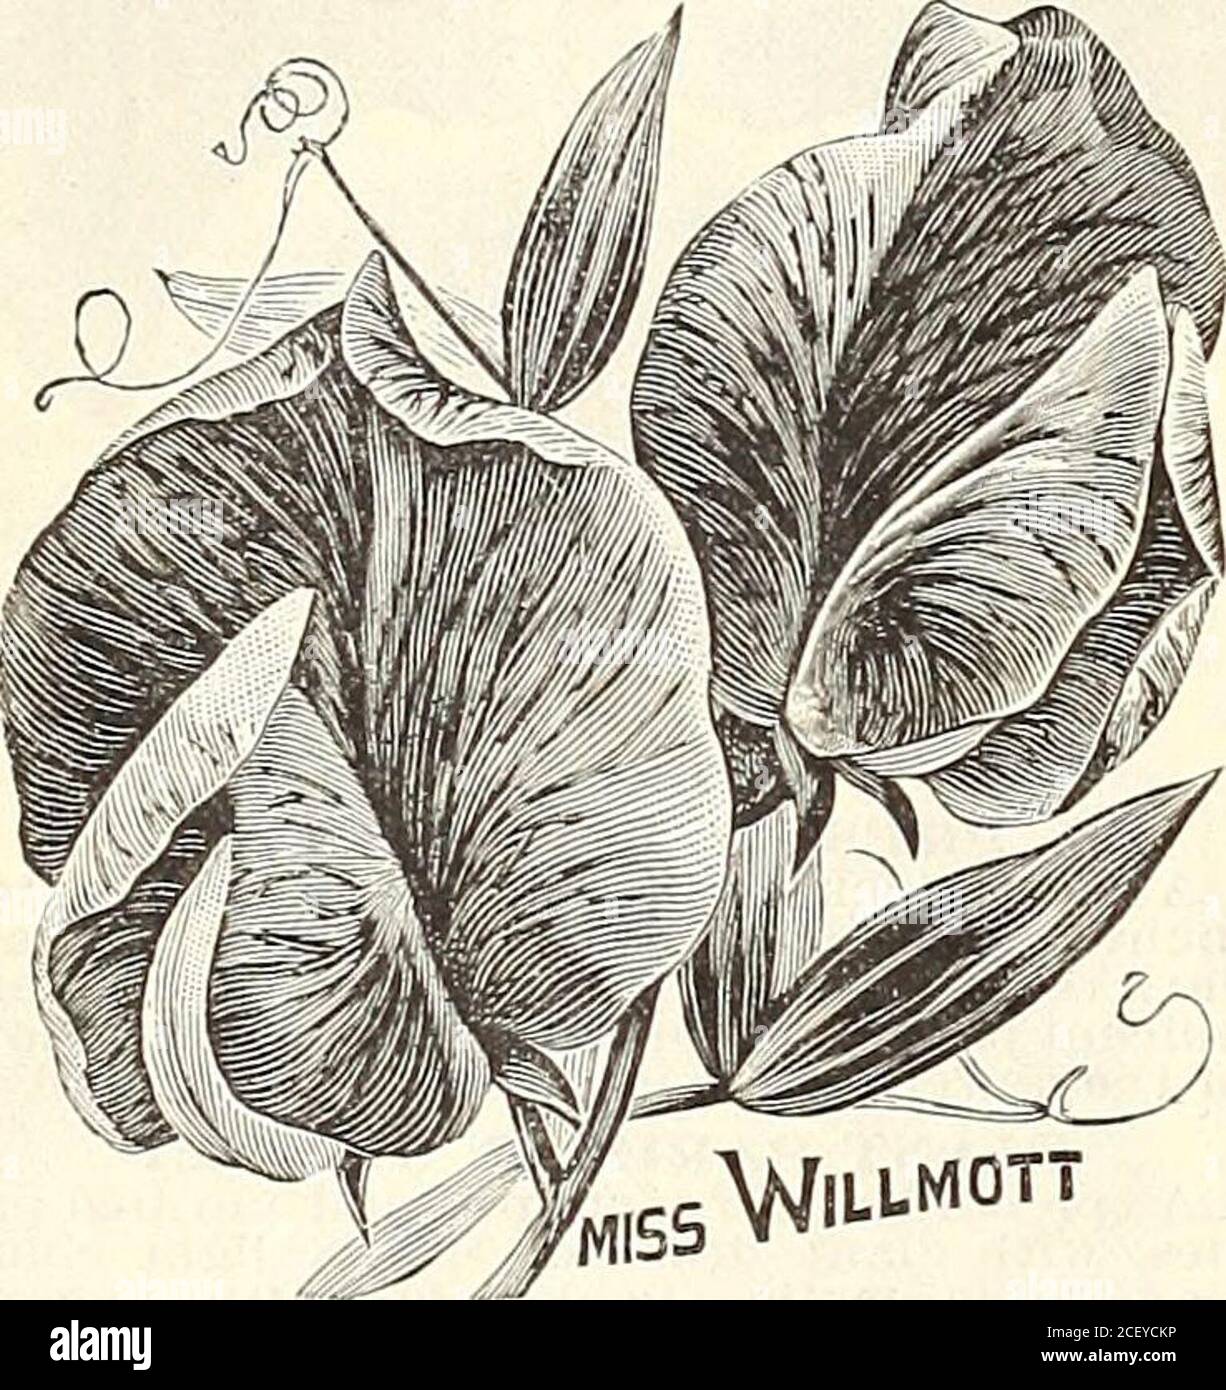 . The Maule seed book for 1905. salmon red;Wings bright rose. Bears three tlowers on a stem. Majestic, Standard a deep, rich, rosy pink; wingssoft rose. Truly majestic in habit and appearance. Calypso. Standard bright magenta; wings delicatemaave. Quite a novelty in color. Duke of Sutherlaud. Deep claret, reddishtinge: wings deep violet purple. Jeanie Qordon. Bright rose, shaded cream.First otTered by me this year. liorcl Kenyon. Self colored or uniform. Rosemagenta, flushed with crimson. Mrs. Fitzgerald. Soft cream colored, flushedand edged with delicate rose. Almost a self or uniformcolored Stock Photo